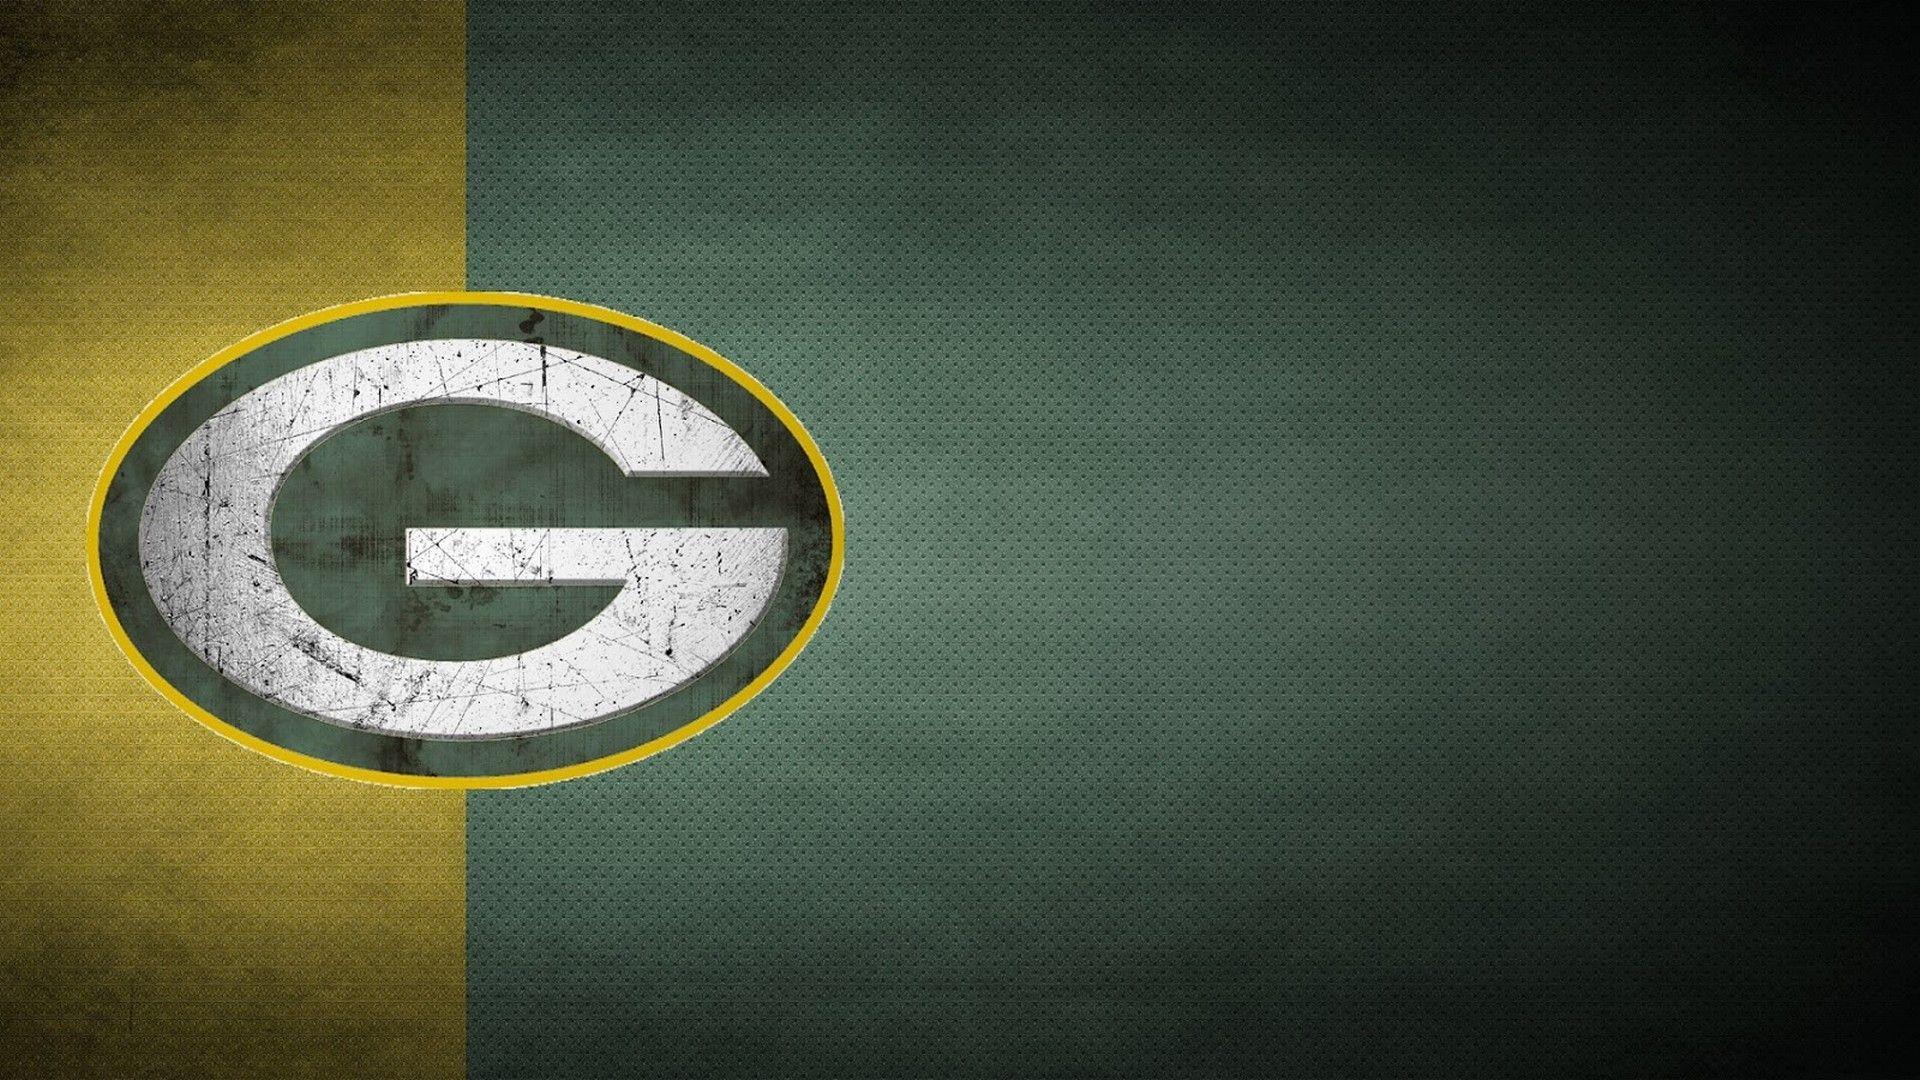 Green Bay Packers Wallpaper For Mac Background NFL Football Wallpaper. Green bay packers wallpaper, Green bay packers, Green bay